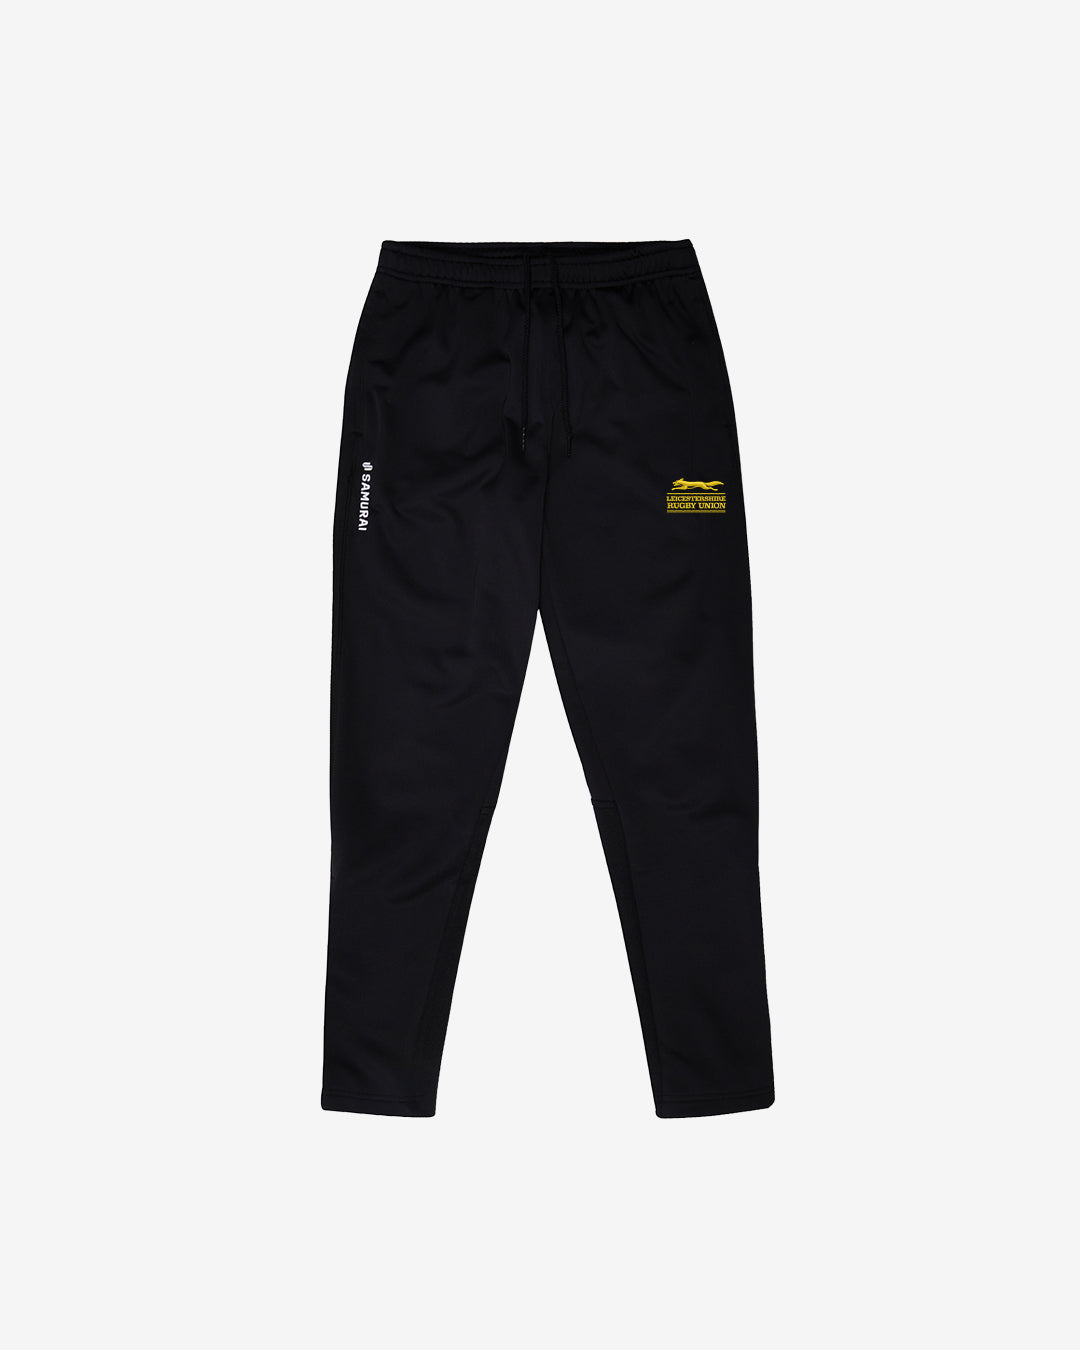 Leicestershire Rugby Union - U:0200 - Men's Tapered Training Pant - Black